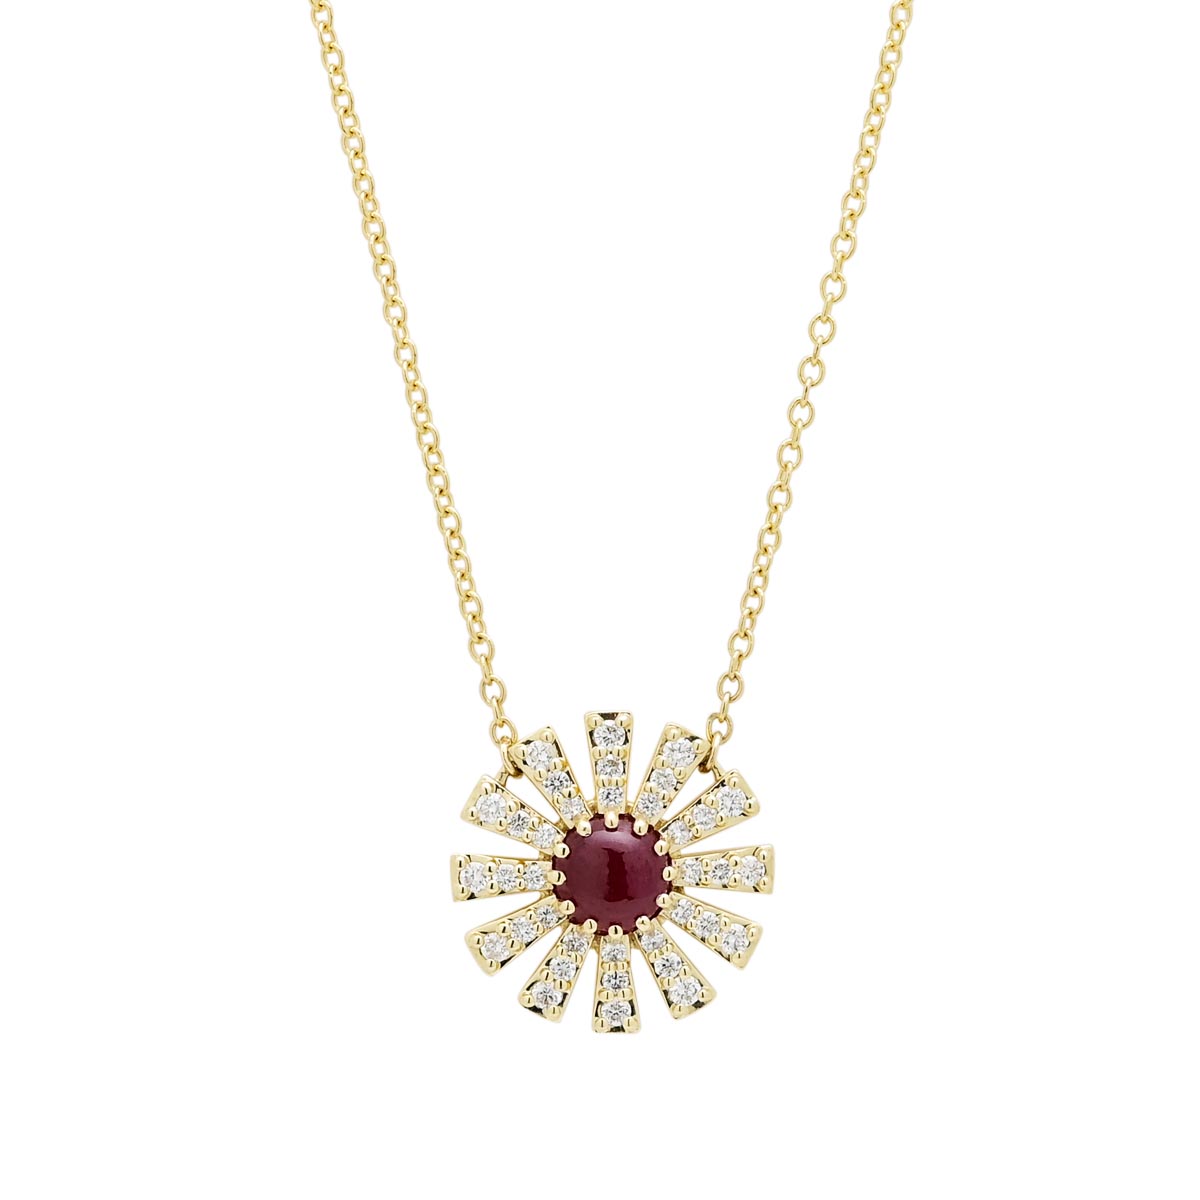 Greenland Ruby Necklace in 10kt Yellow Gold with Diamonds (1/4ct tw)